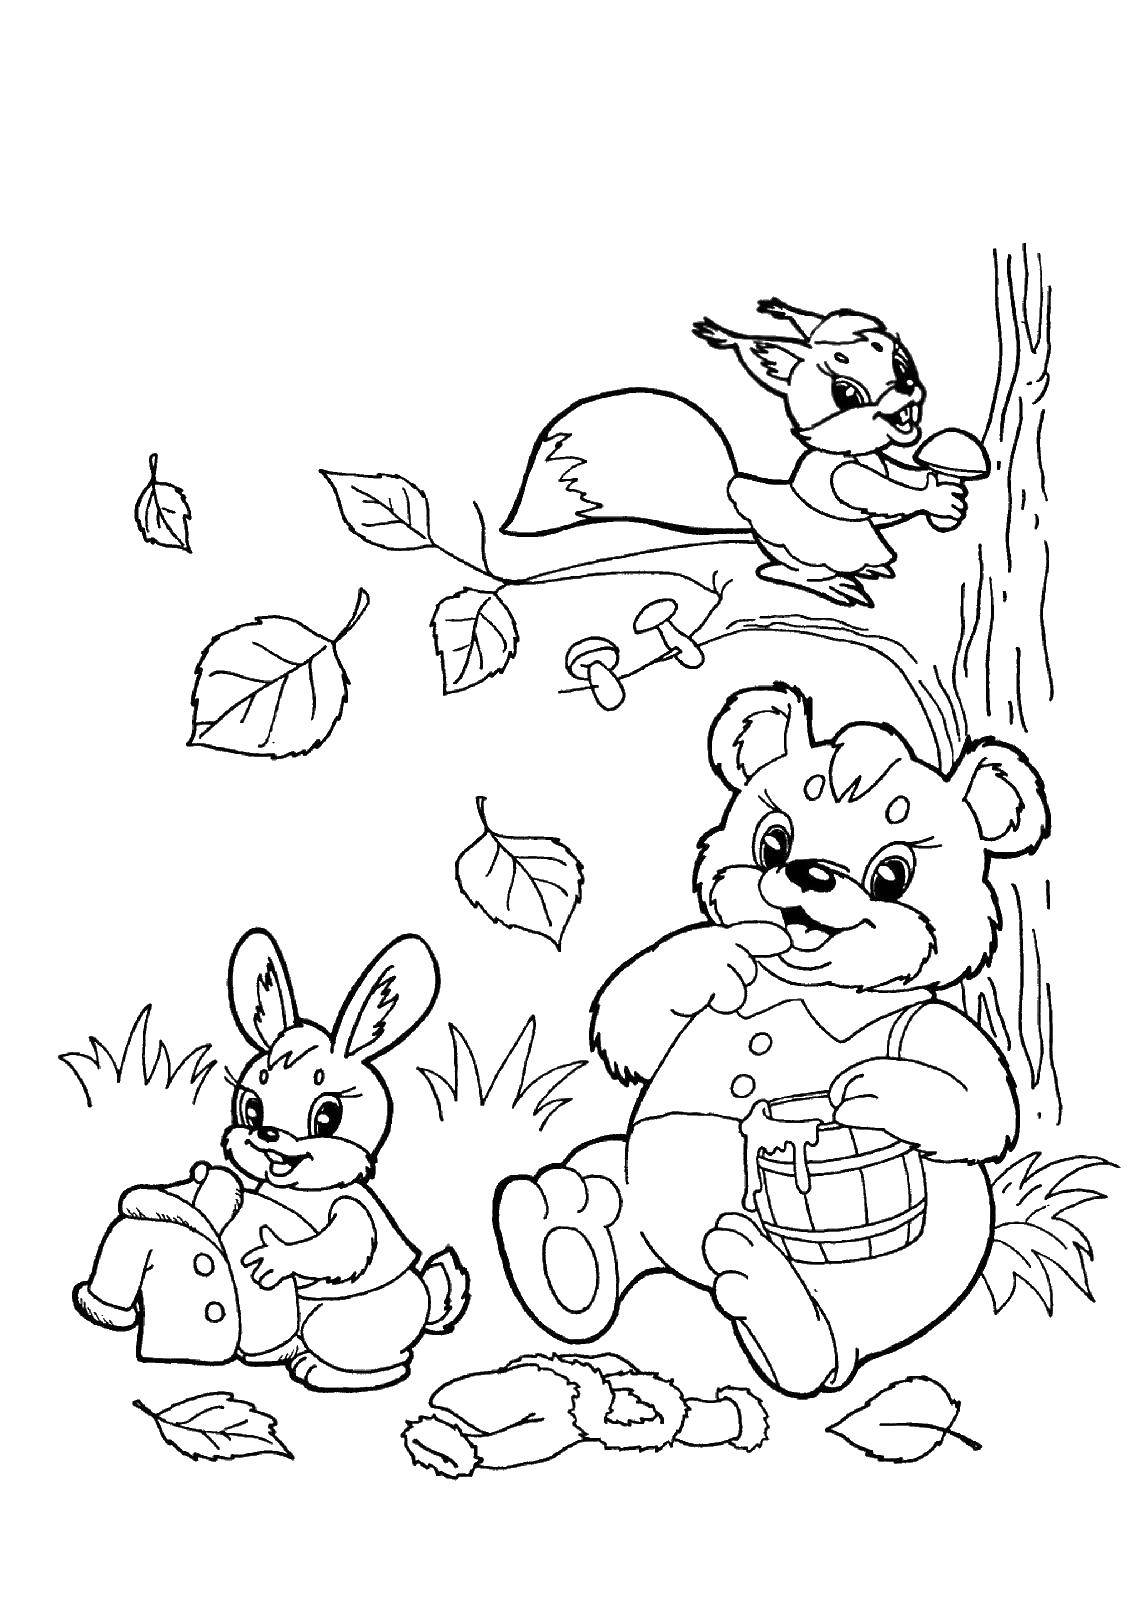 Coloring Bear, two squirrels. Category Animals. Tags:  animals, squirrels, bear.